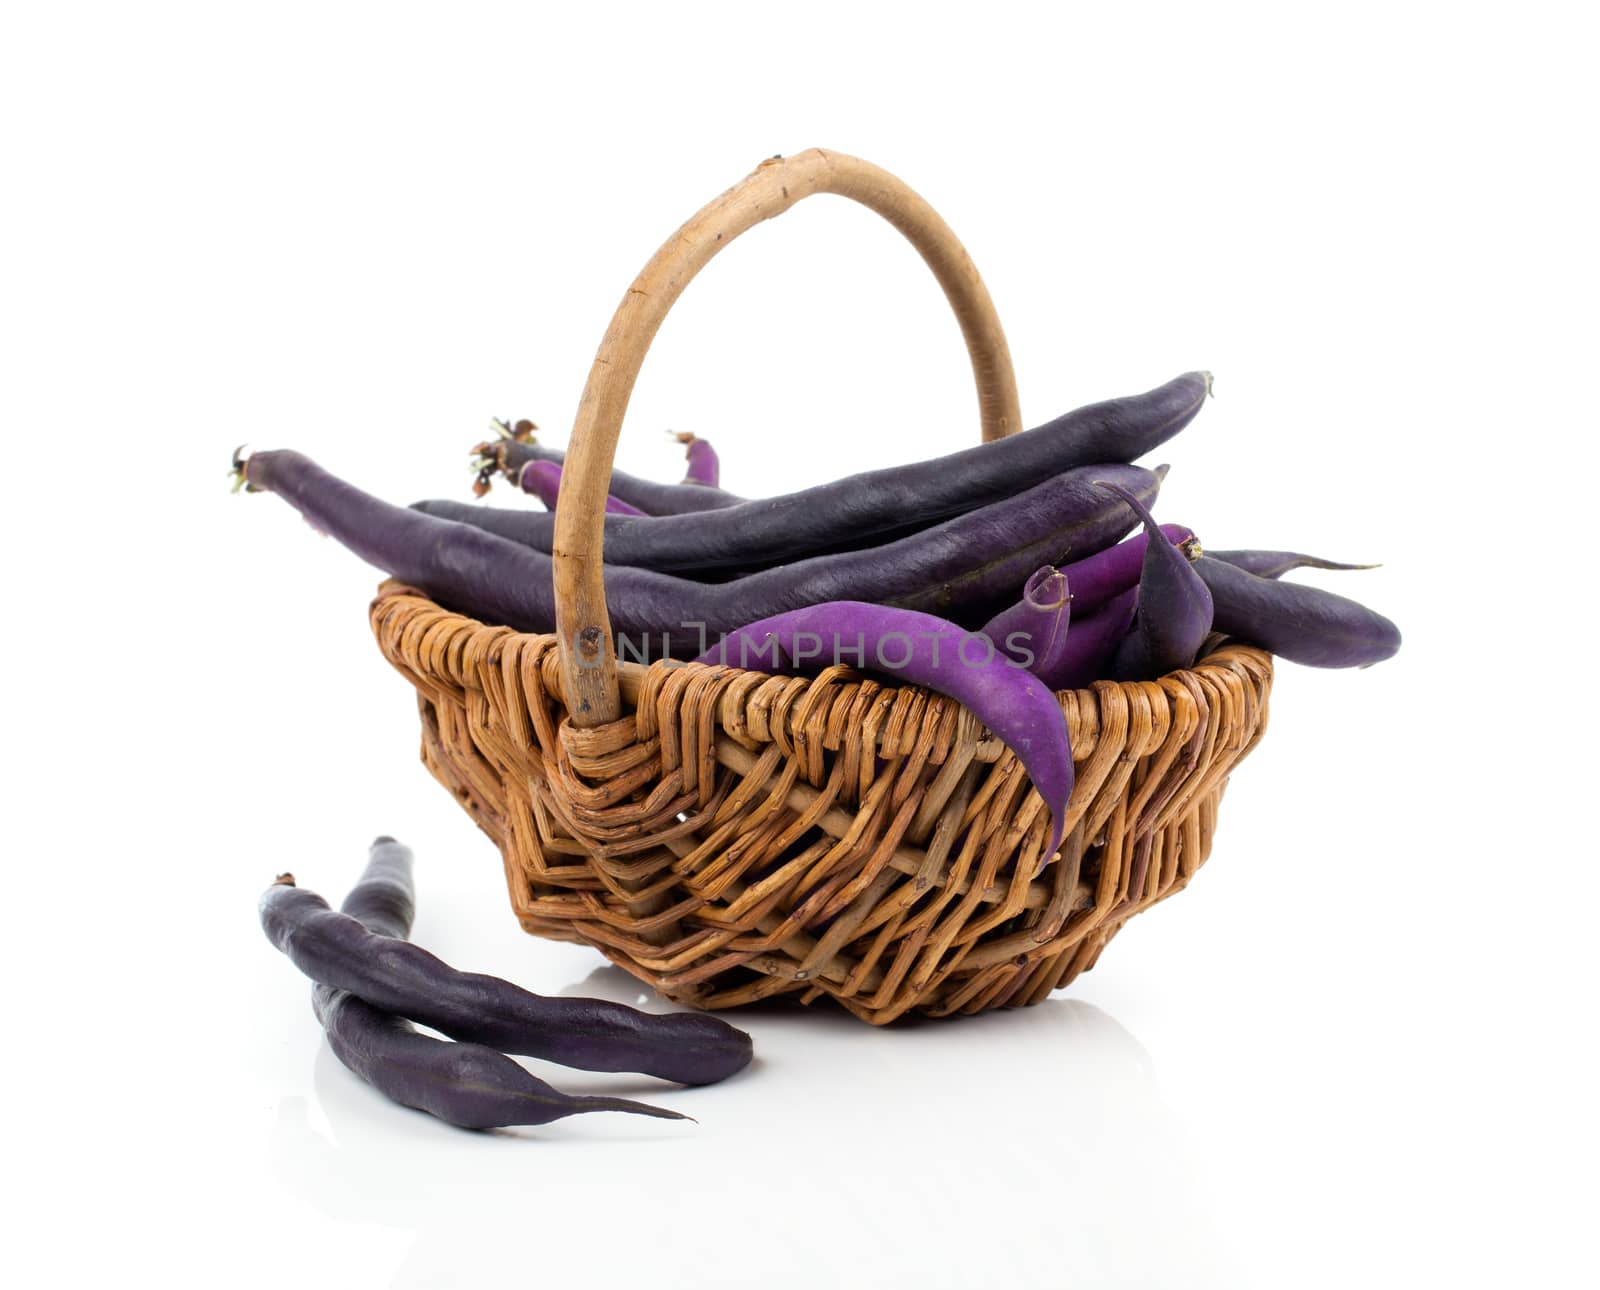 Red bean pods in wicker basket over white background by motorolka